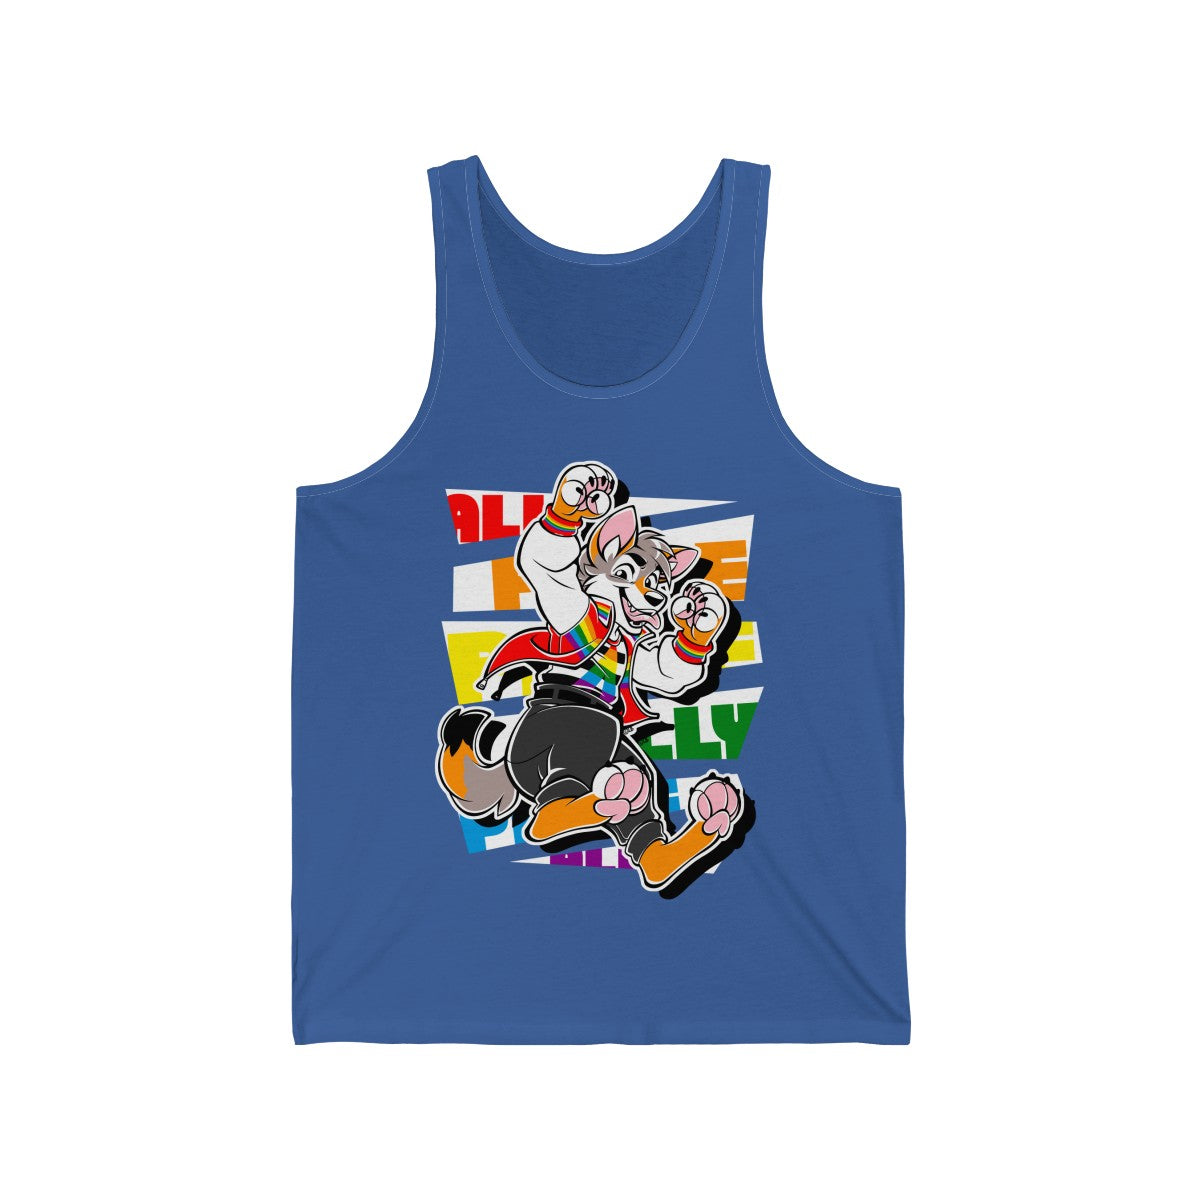 Ally Pride Marcus Wolf - Tank Top Tank Top Artworktee Royal Blue XS 